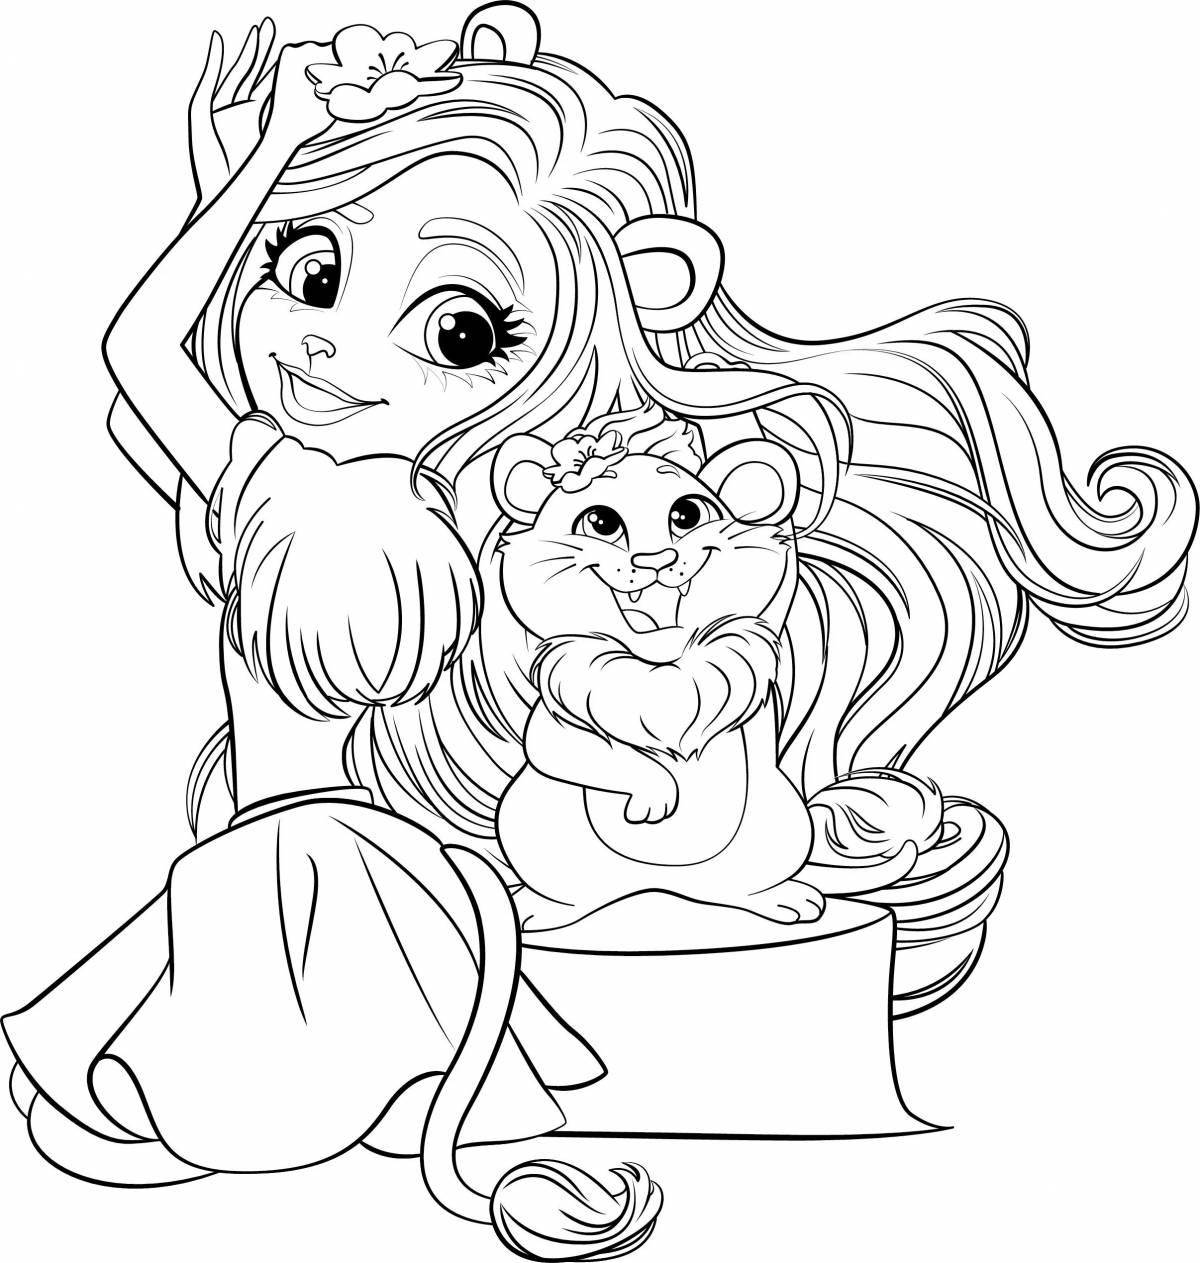 Cute inchanchymus coloring page